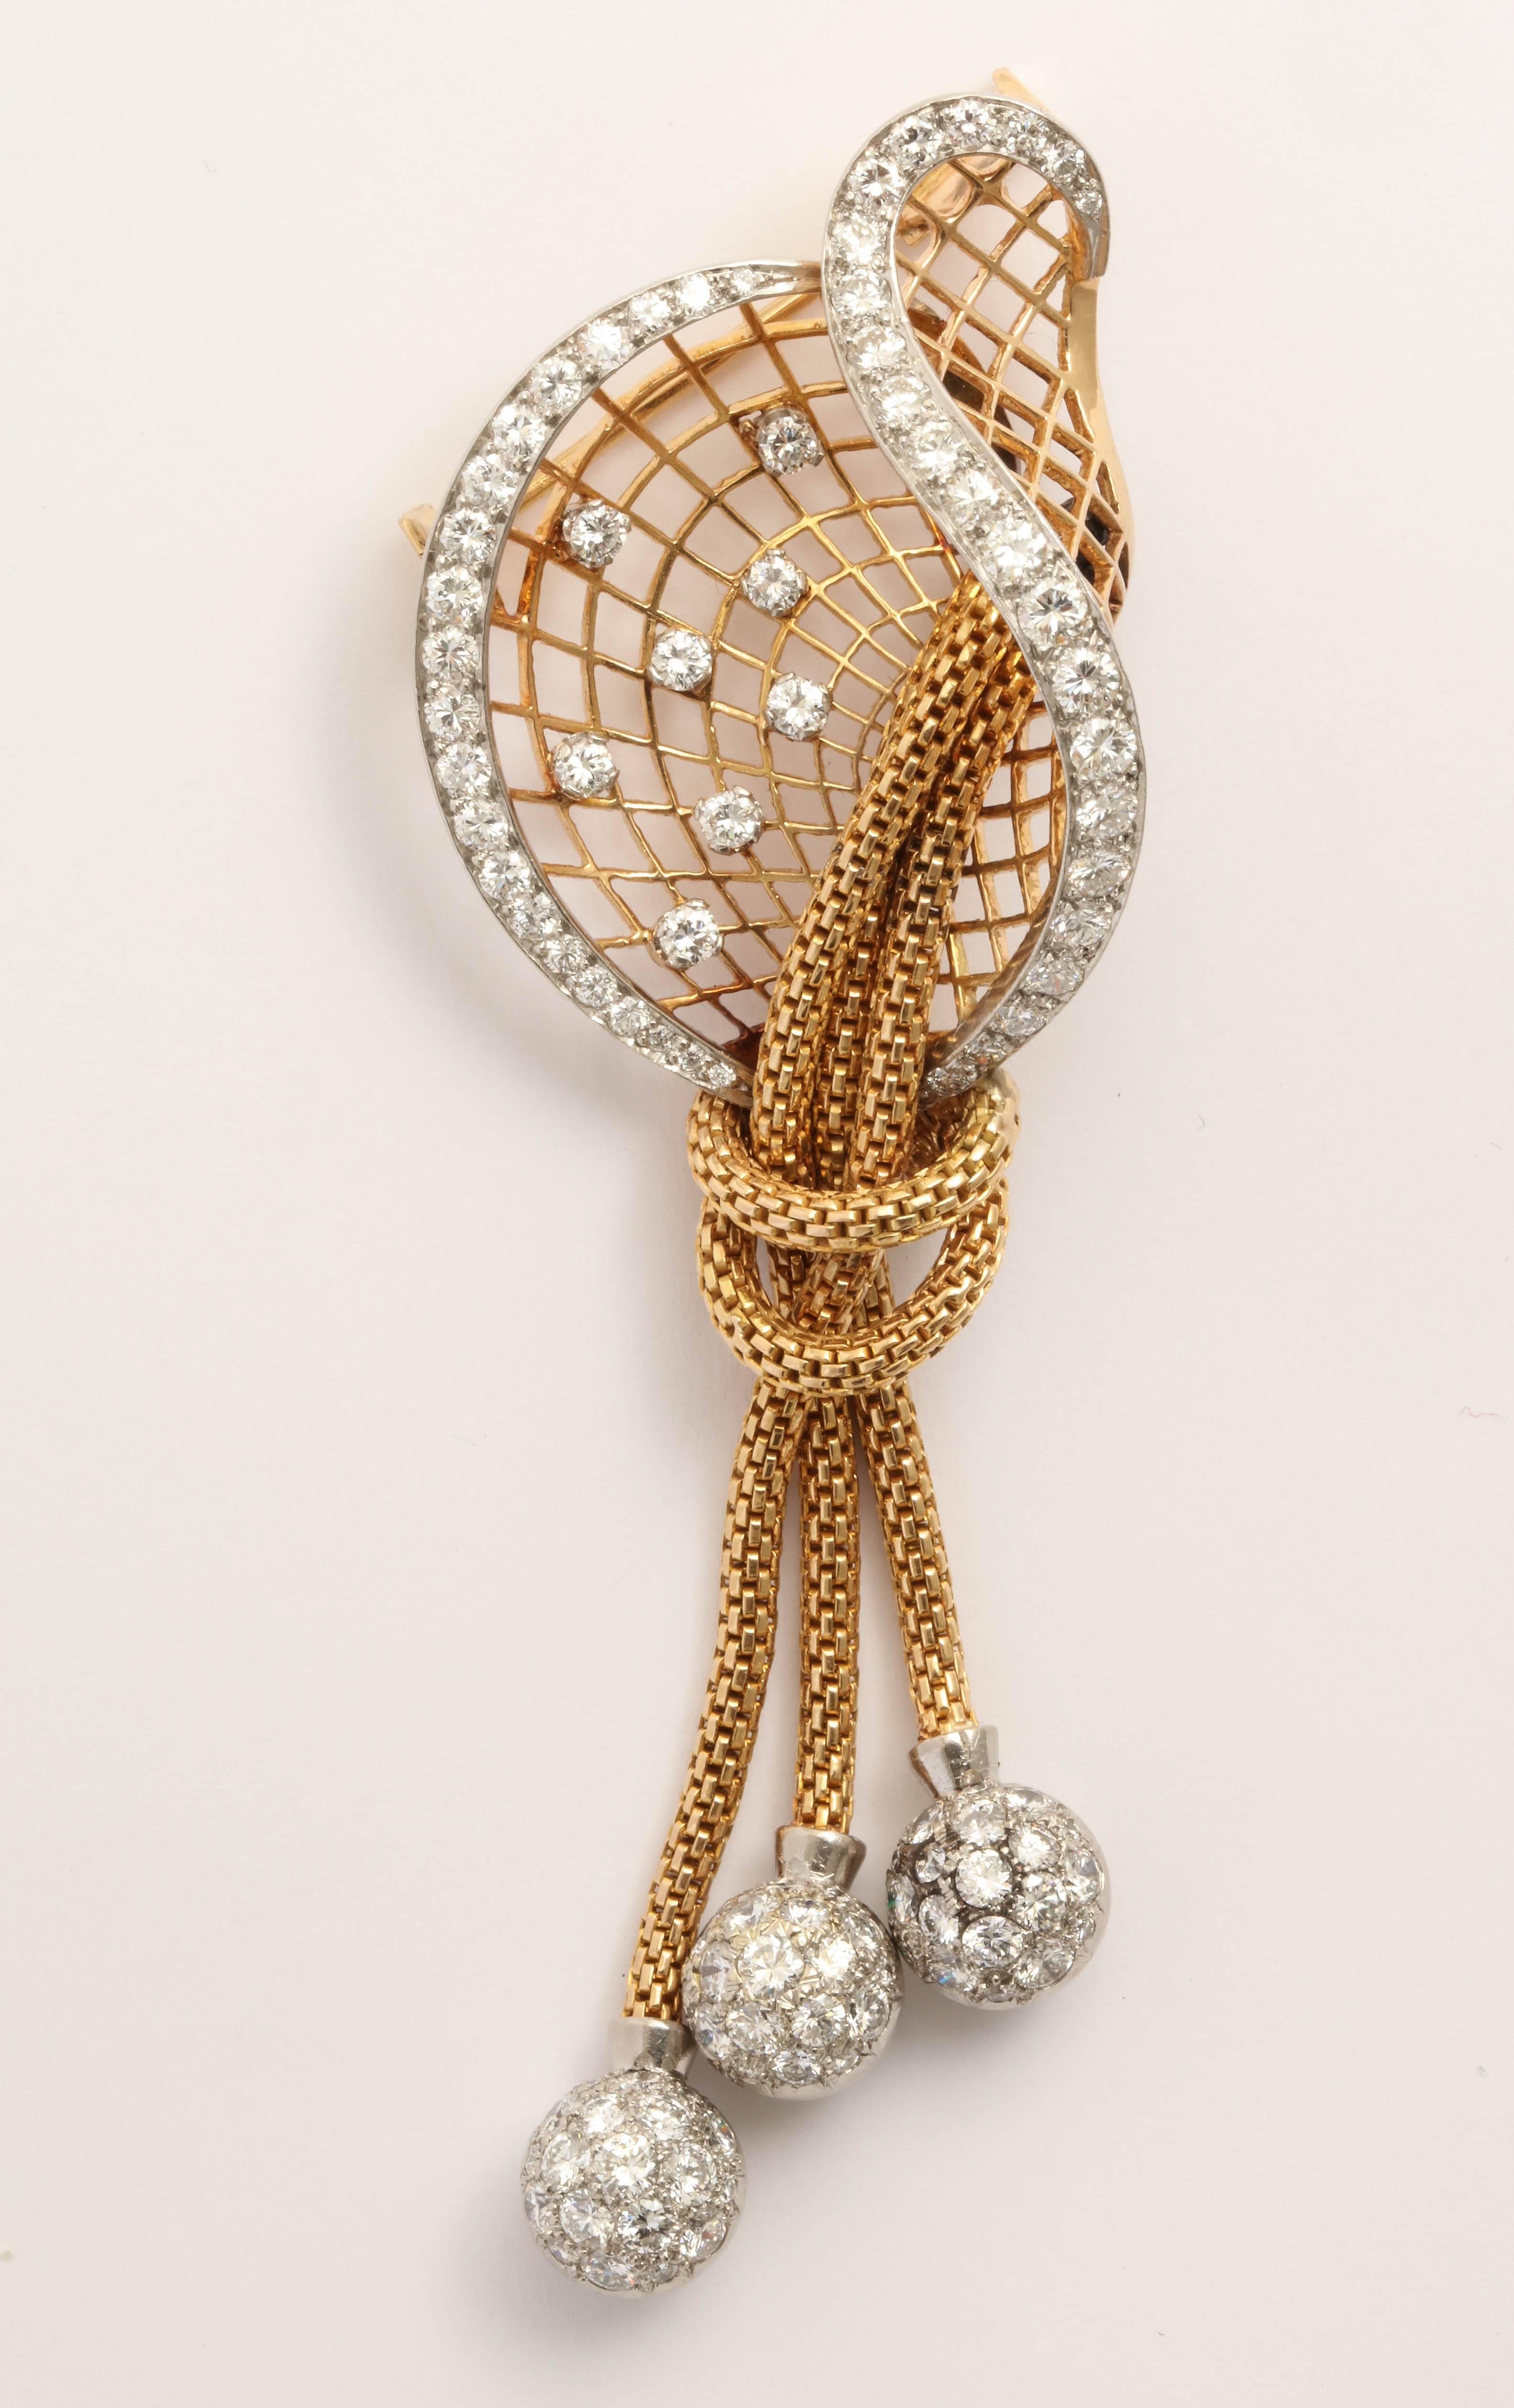 Stylistically strong Diamond & platinum & 18kt YellowGold Brooch. Combination of 3 braided drops ending in platinum & pave Diamond set balls descending from an expanding pierced fan of Gold that is criss crossed between 2 undulating rows